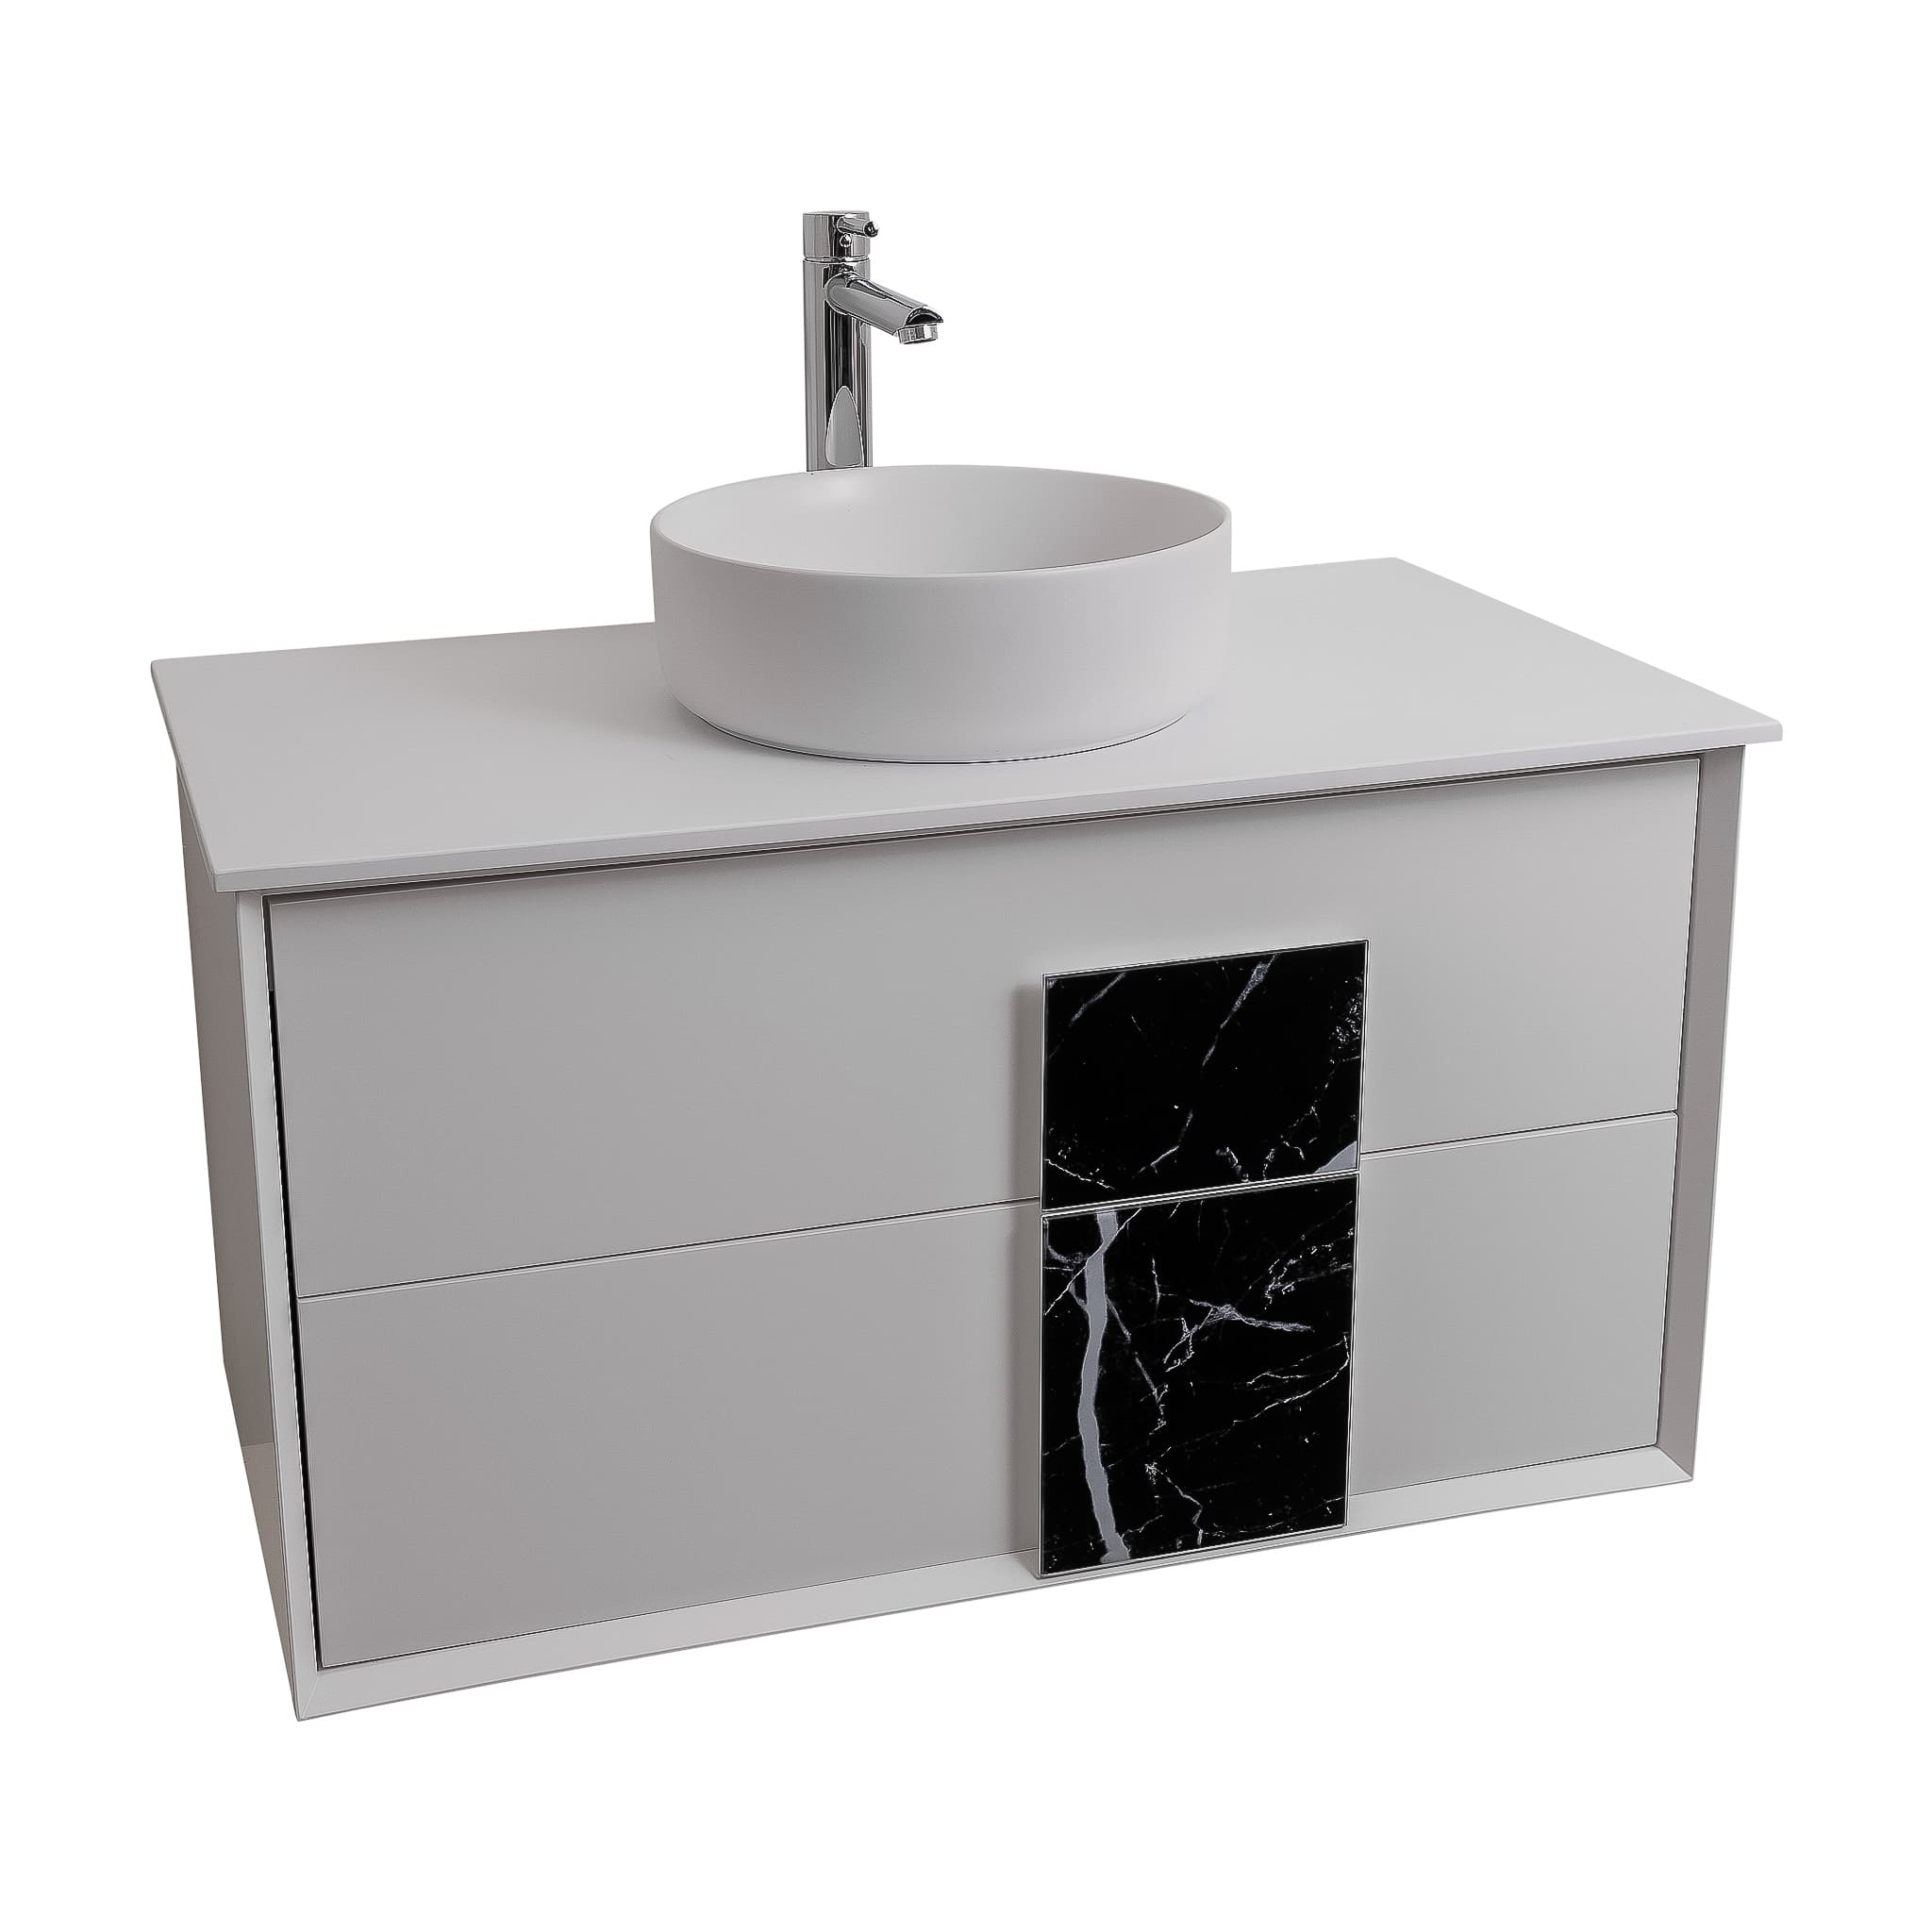 Piazza 31.5 Matte White With Black Marble Handle Cabinet, Ares White Top and Ares White Ceramic Basin, Wall Mounted Modern Vanity Set